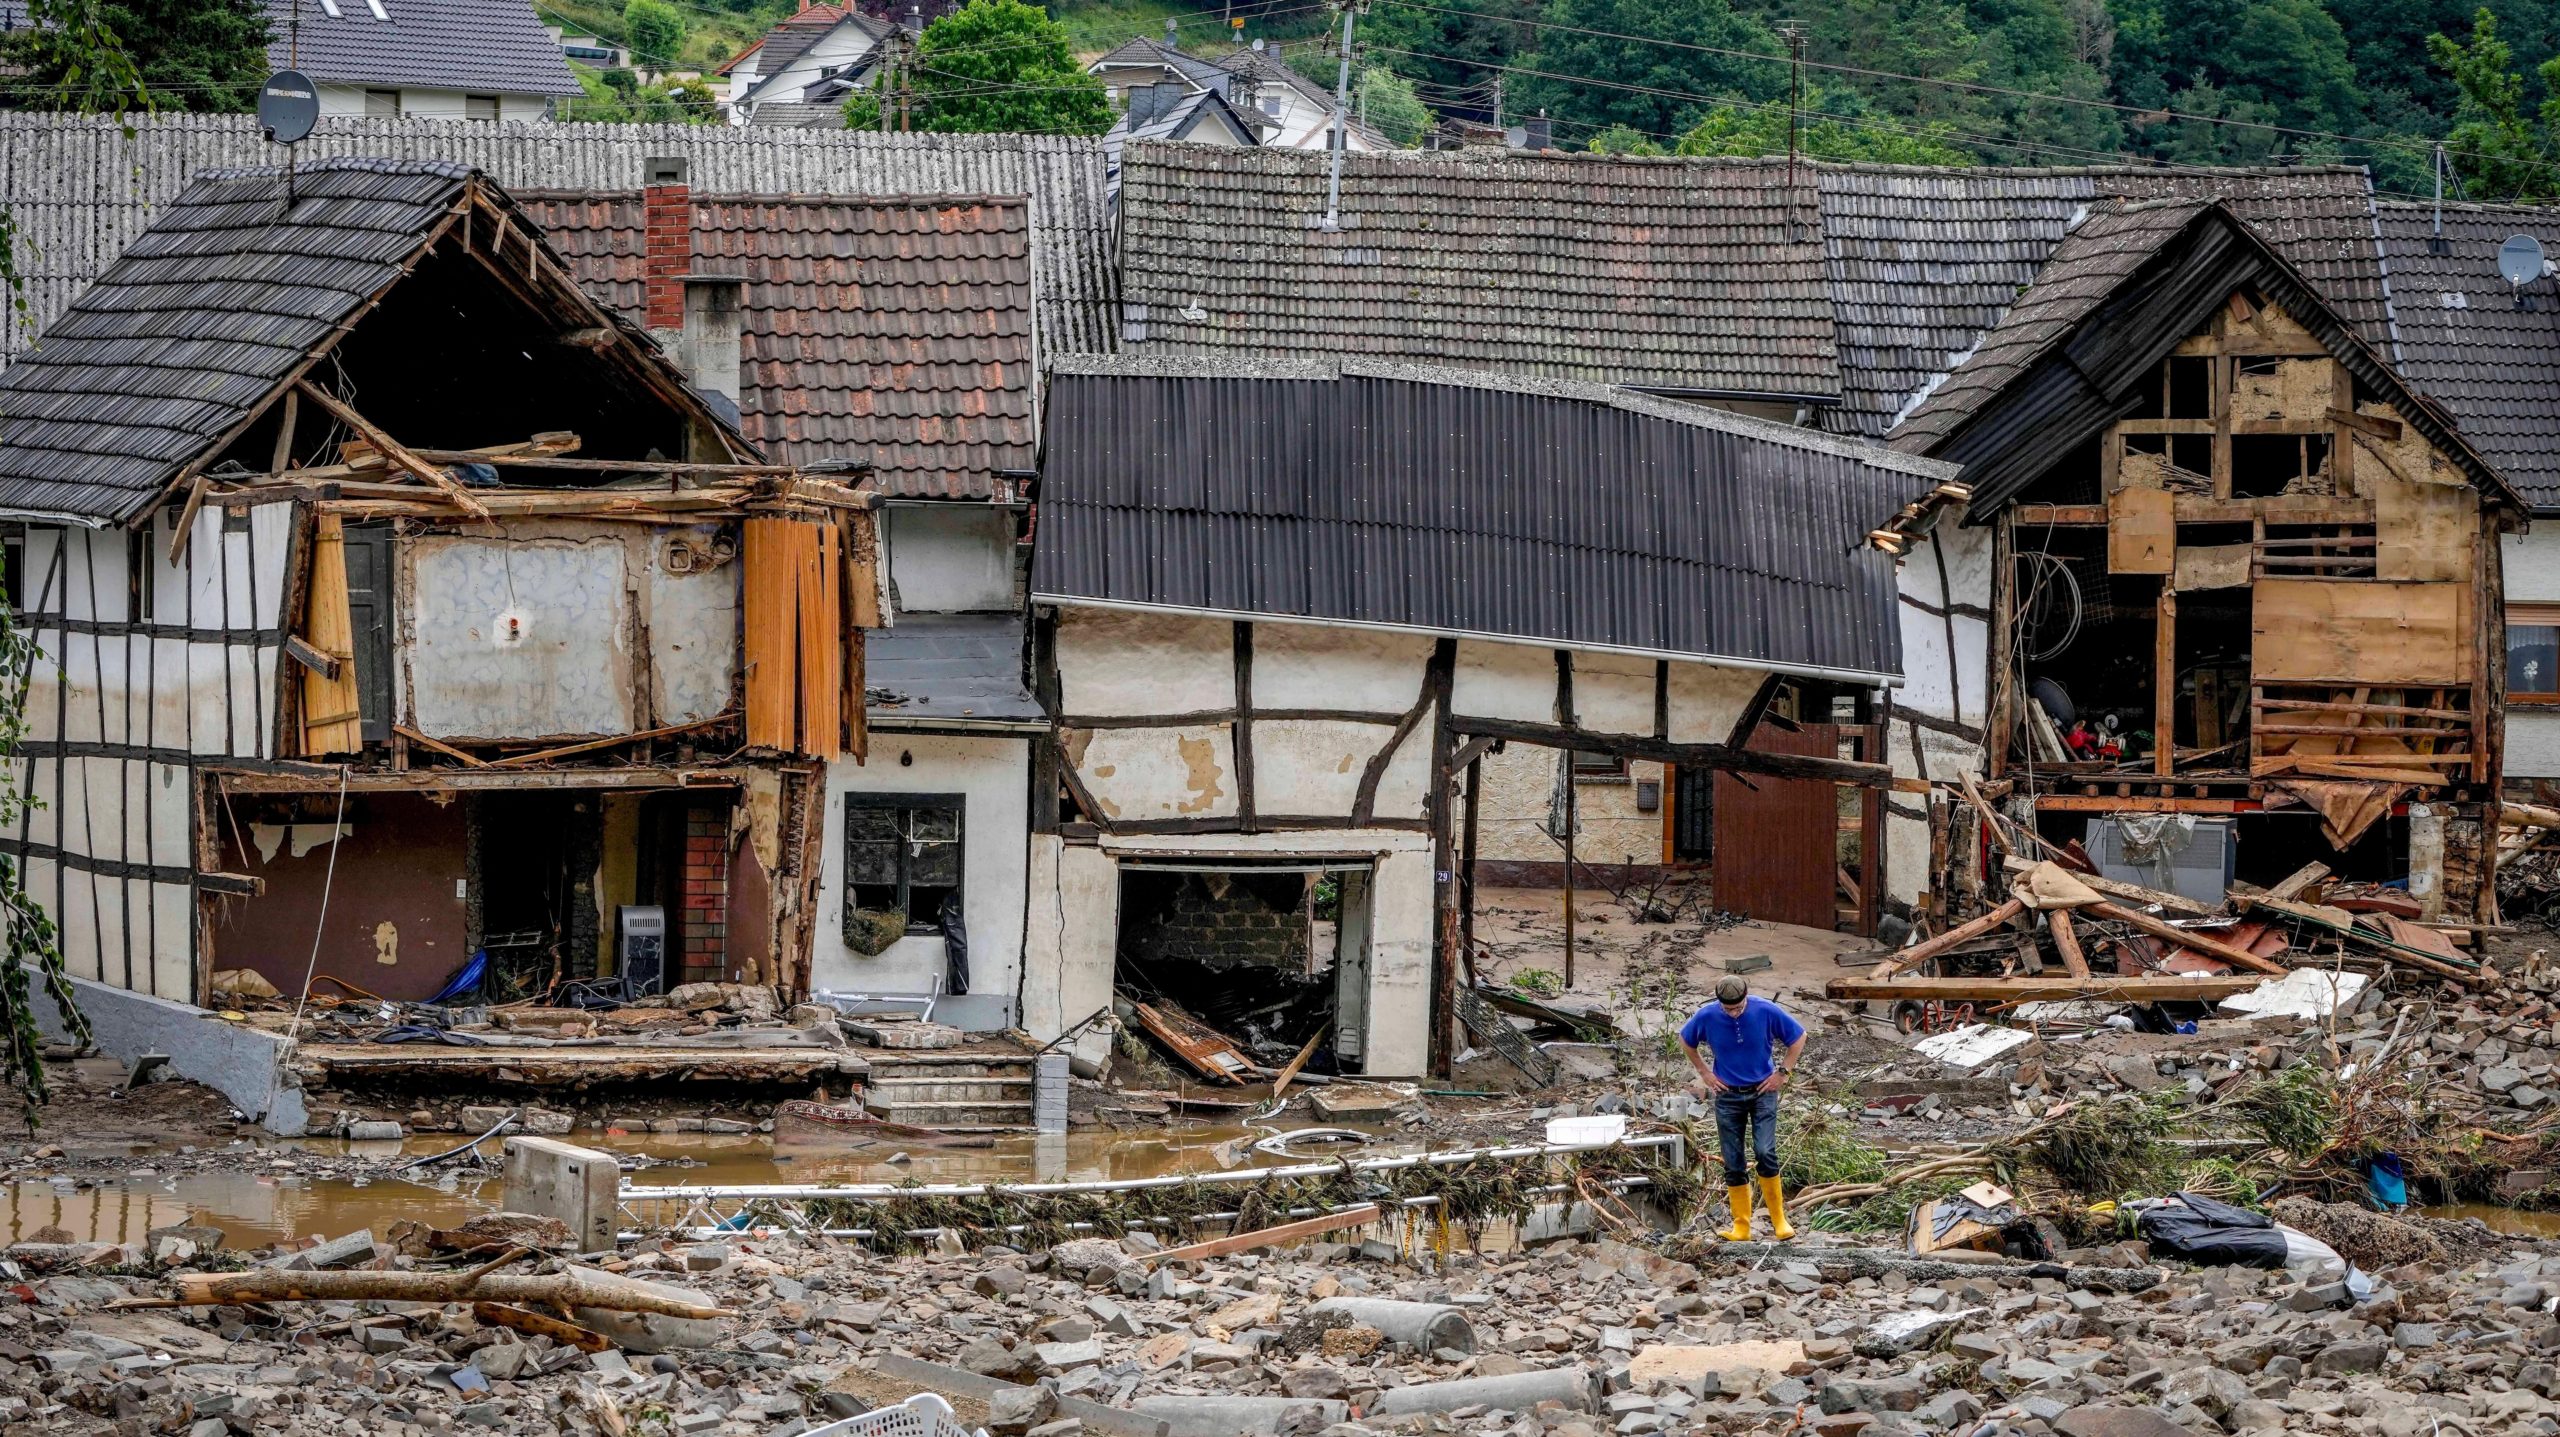 Destroyed houses are seen in Schuld, Germany, Thursday, July 15. (Photo: Michael Probst, AP)